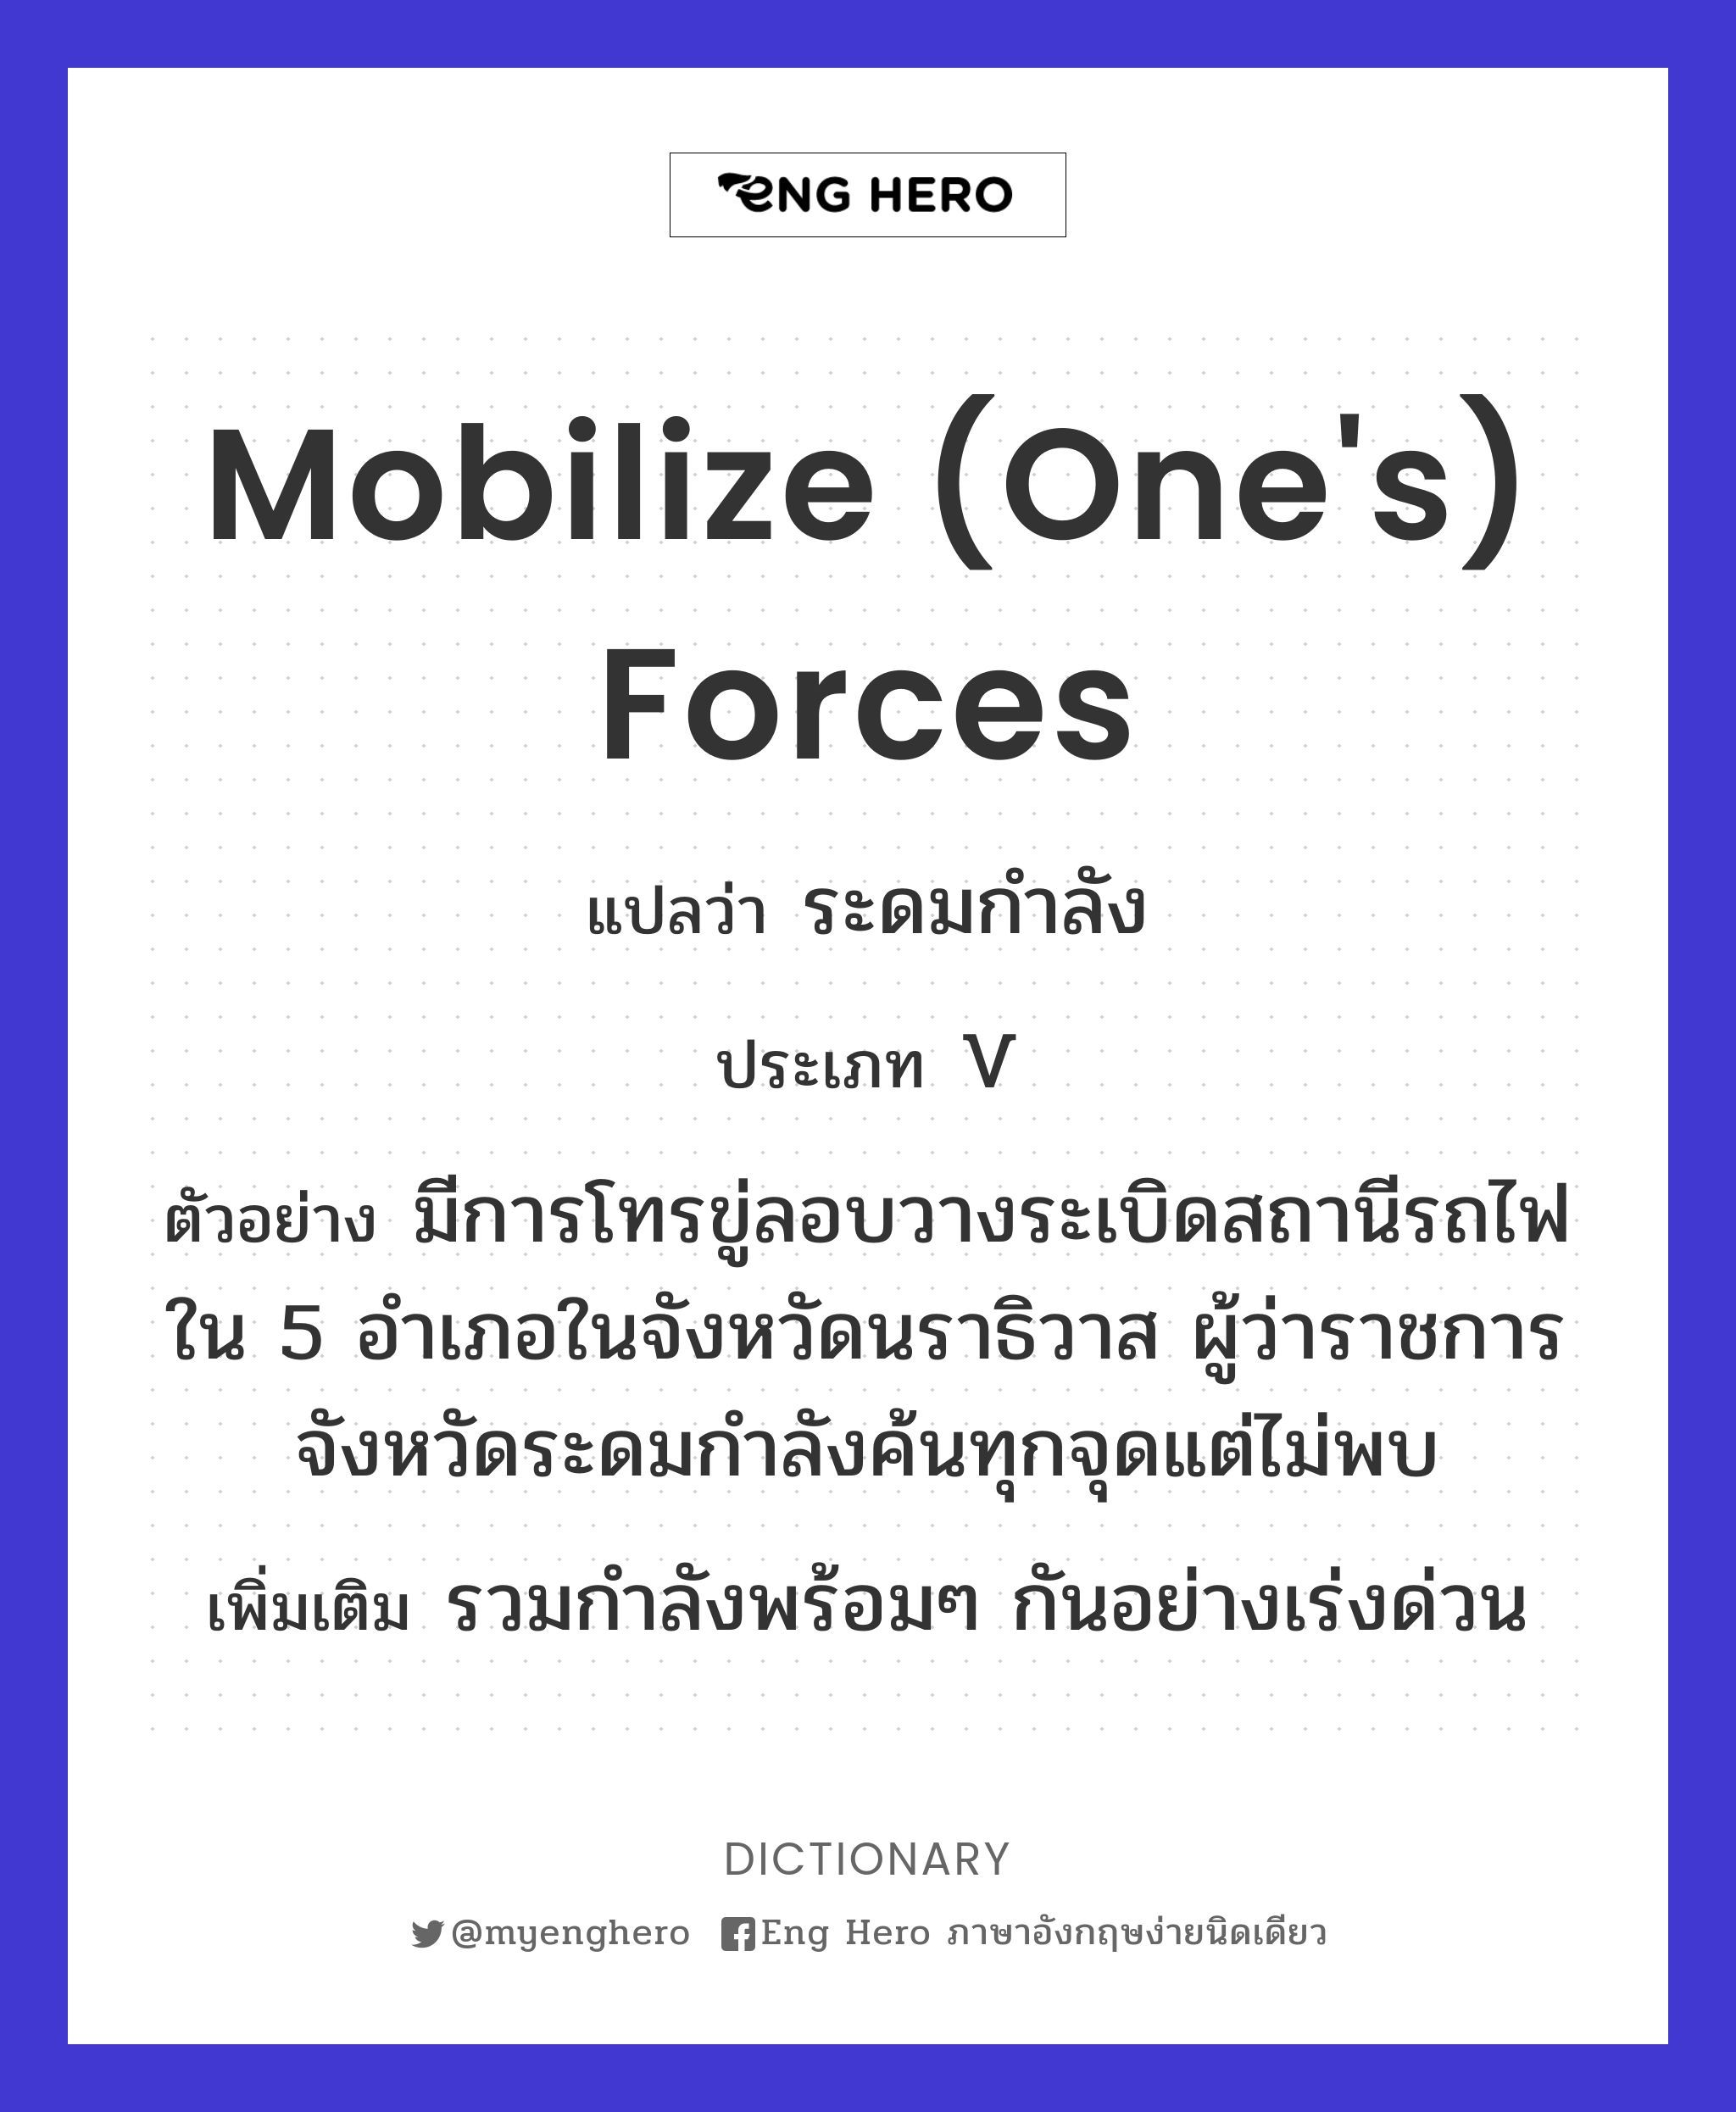 mobilize (one's) forces